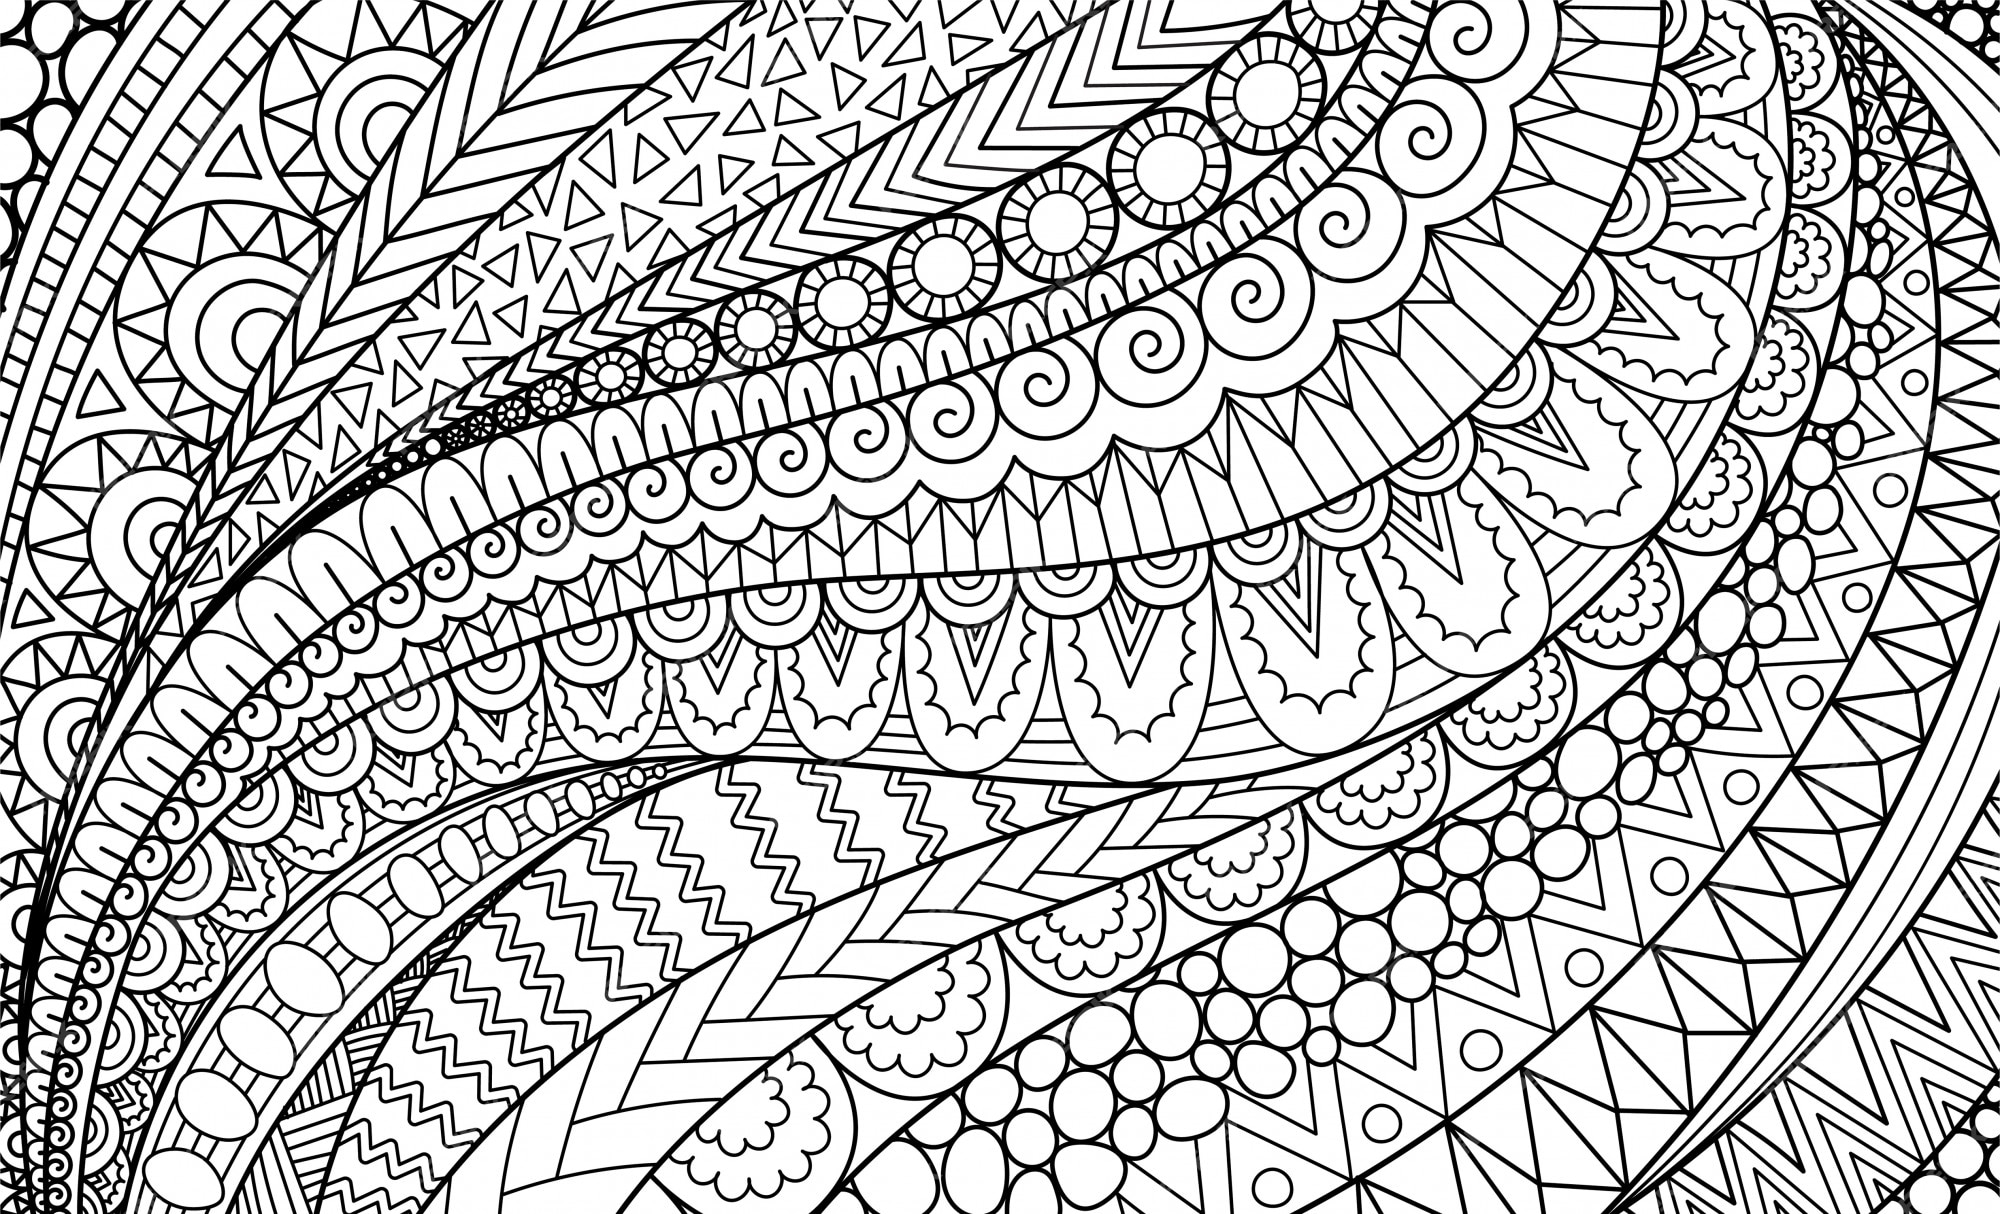 Coloring pages Vectors & Illustrations for Free Download   Freepik